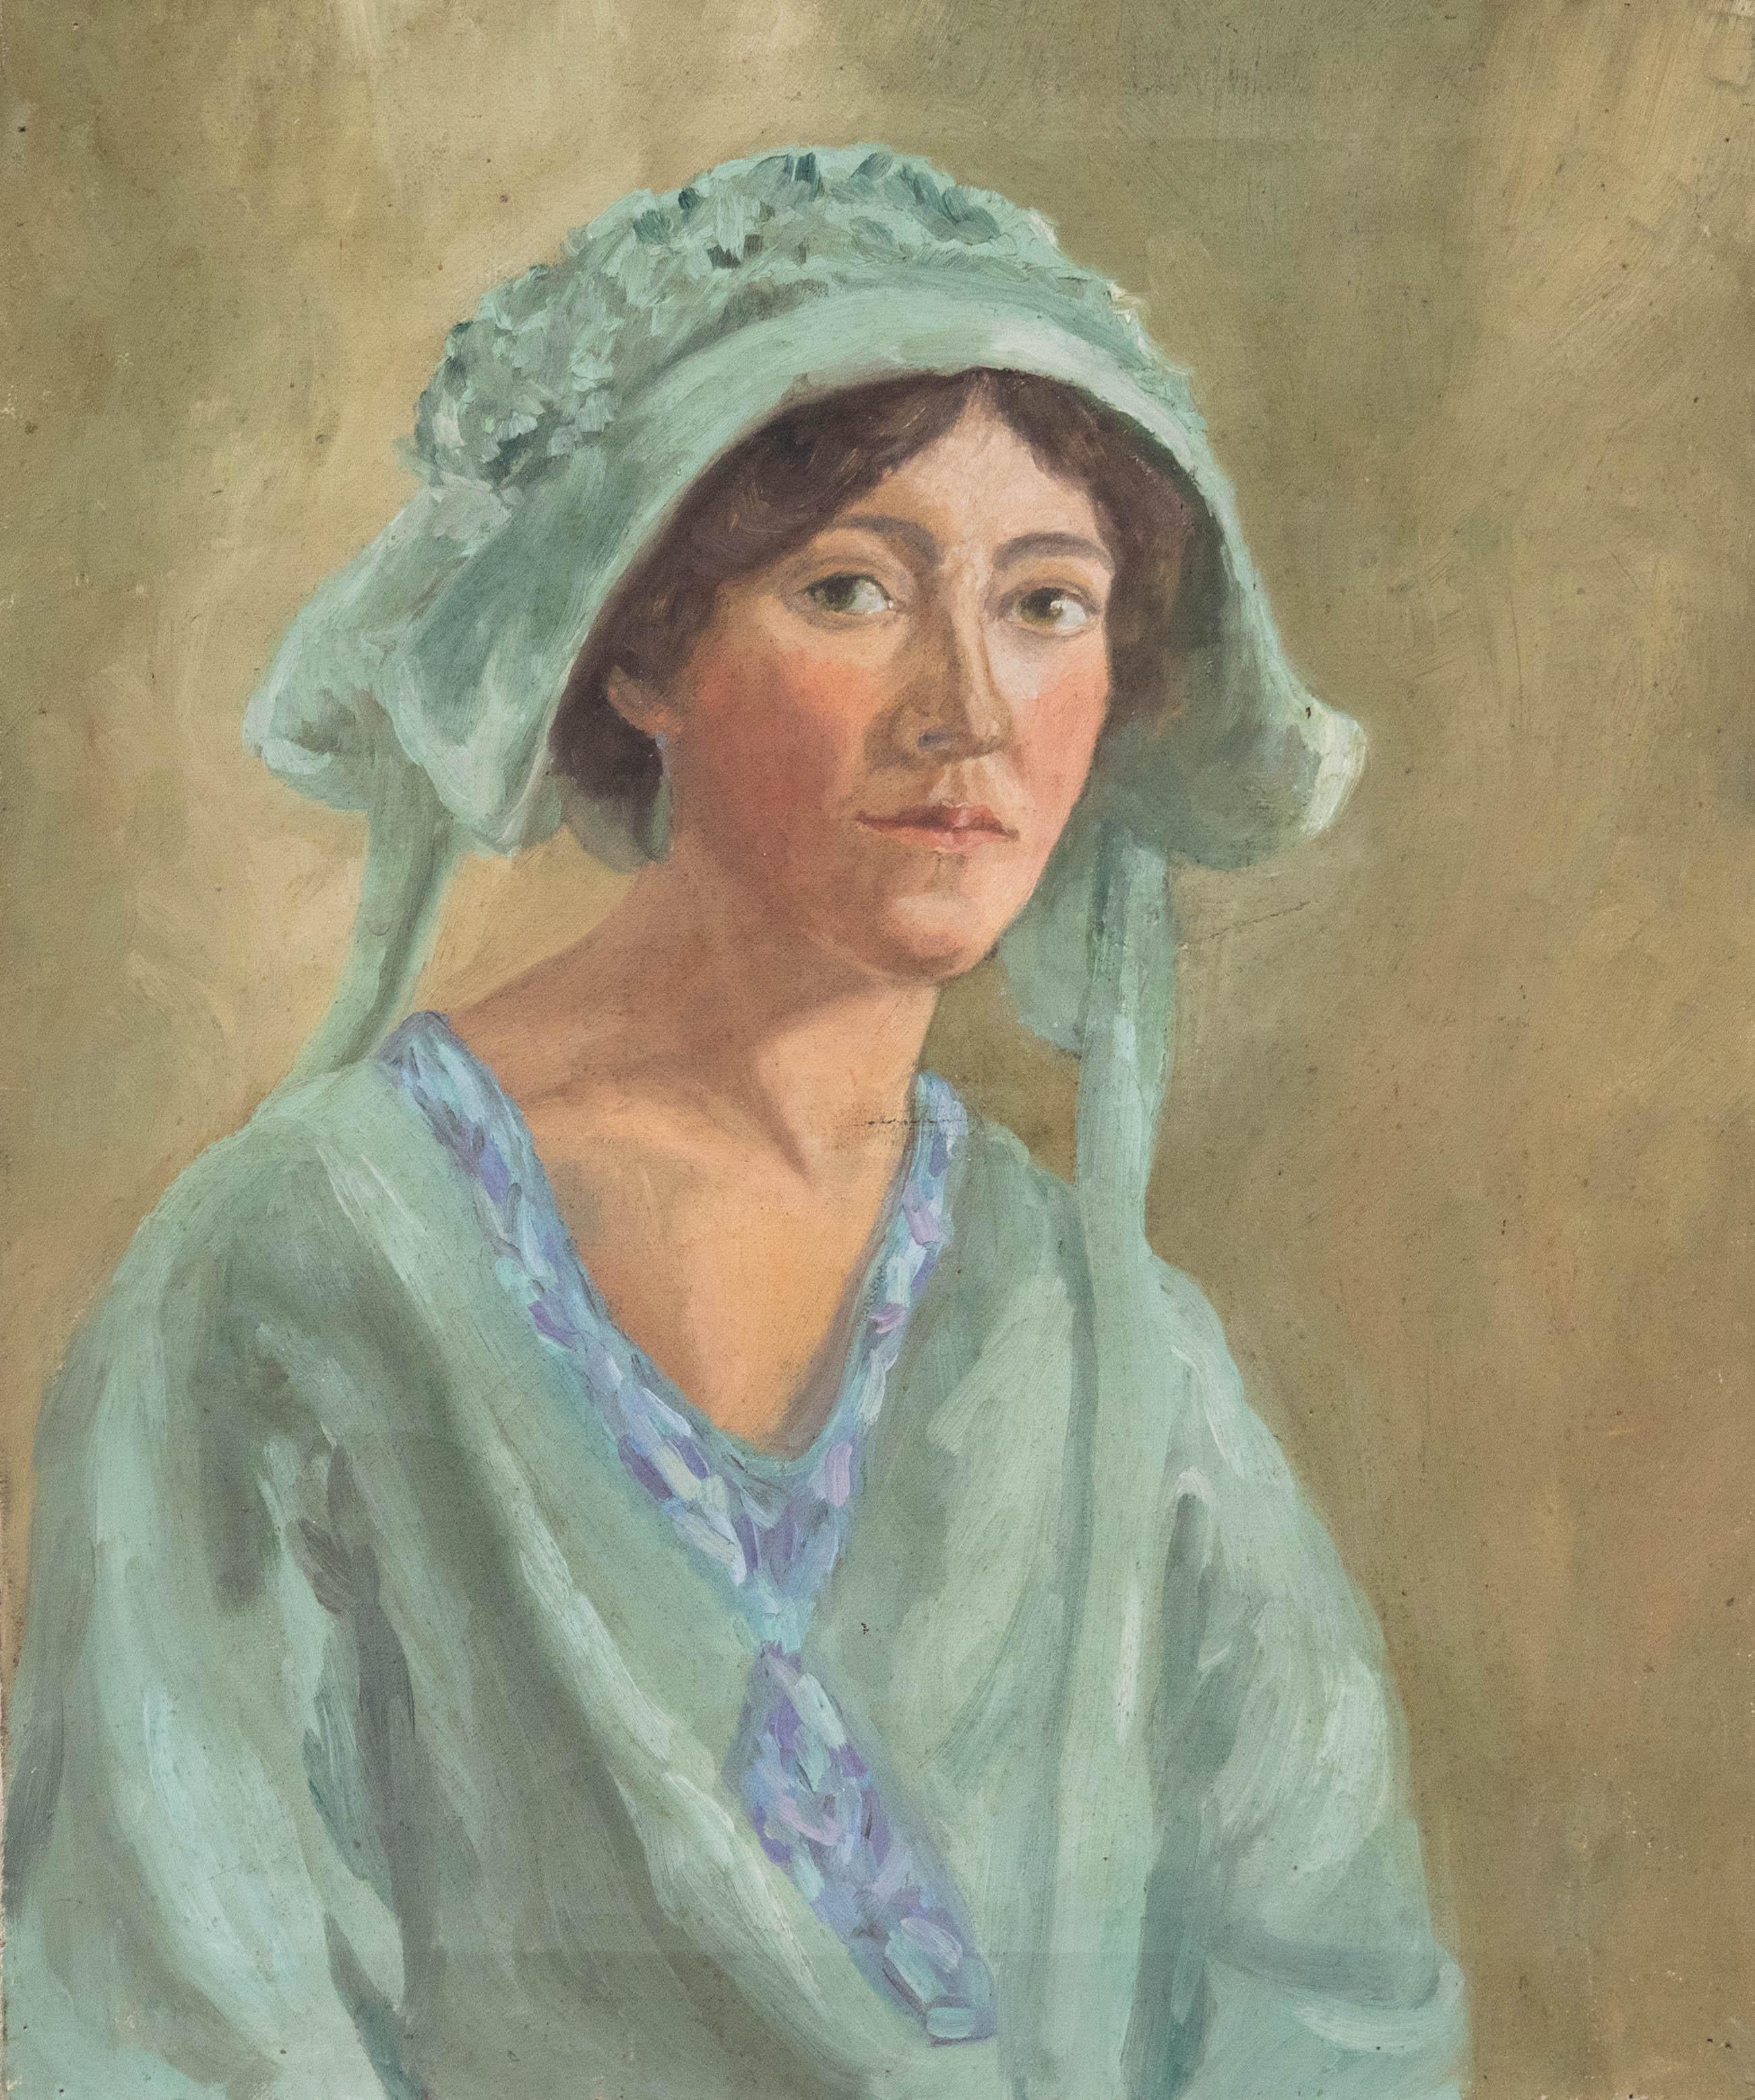 Unknown Portrait Painting - Gerald Trice Martin (1893-1961)- Early 20th Century Oil, Lady in Green Day Dress